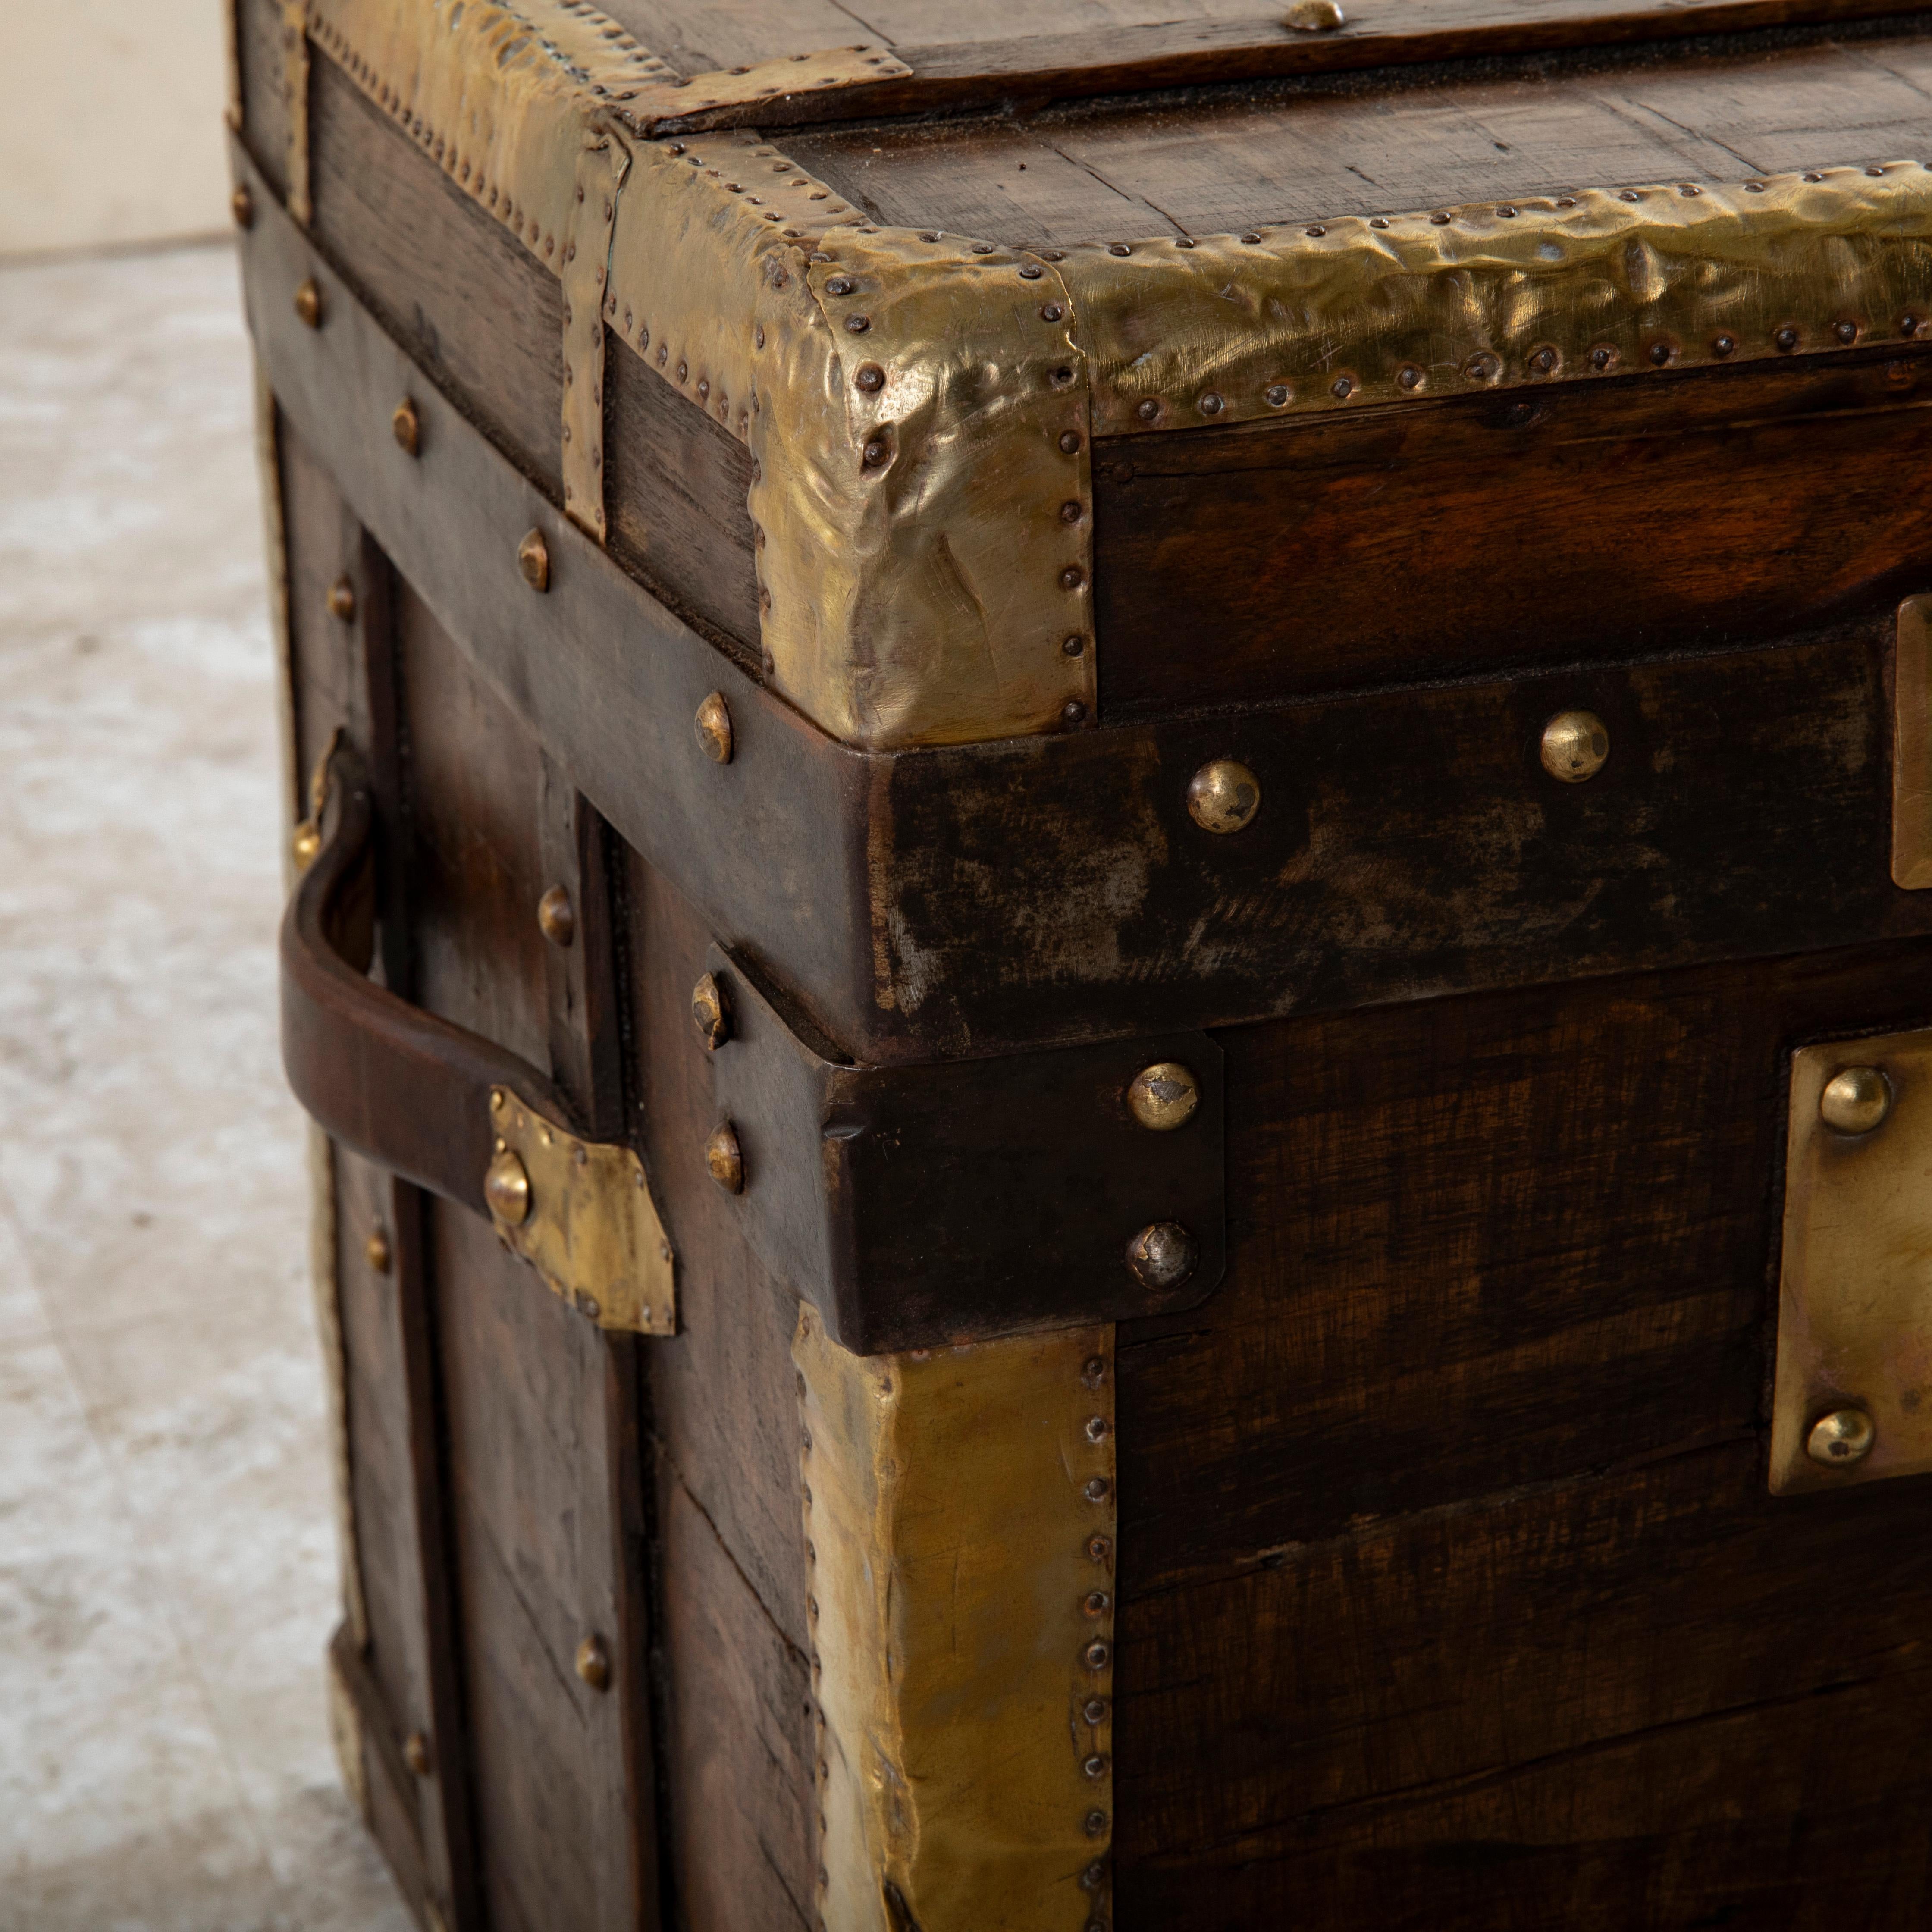 Swiss Wooden Steam Trunk with Runners, Brass, Iron, Leather Details, circa 1880 9